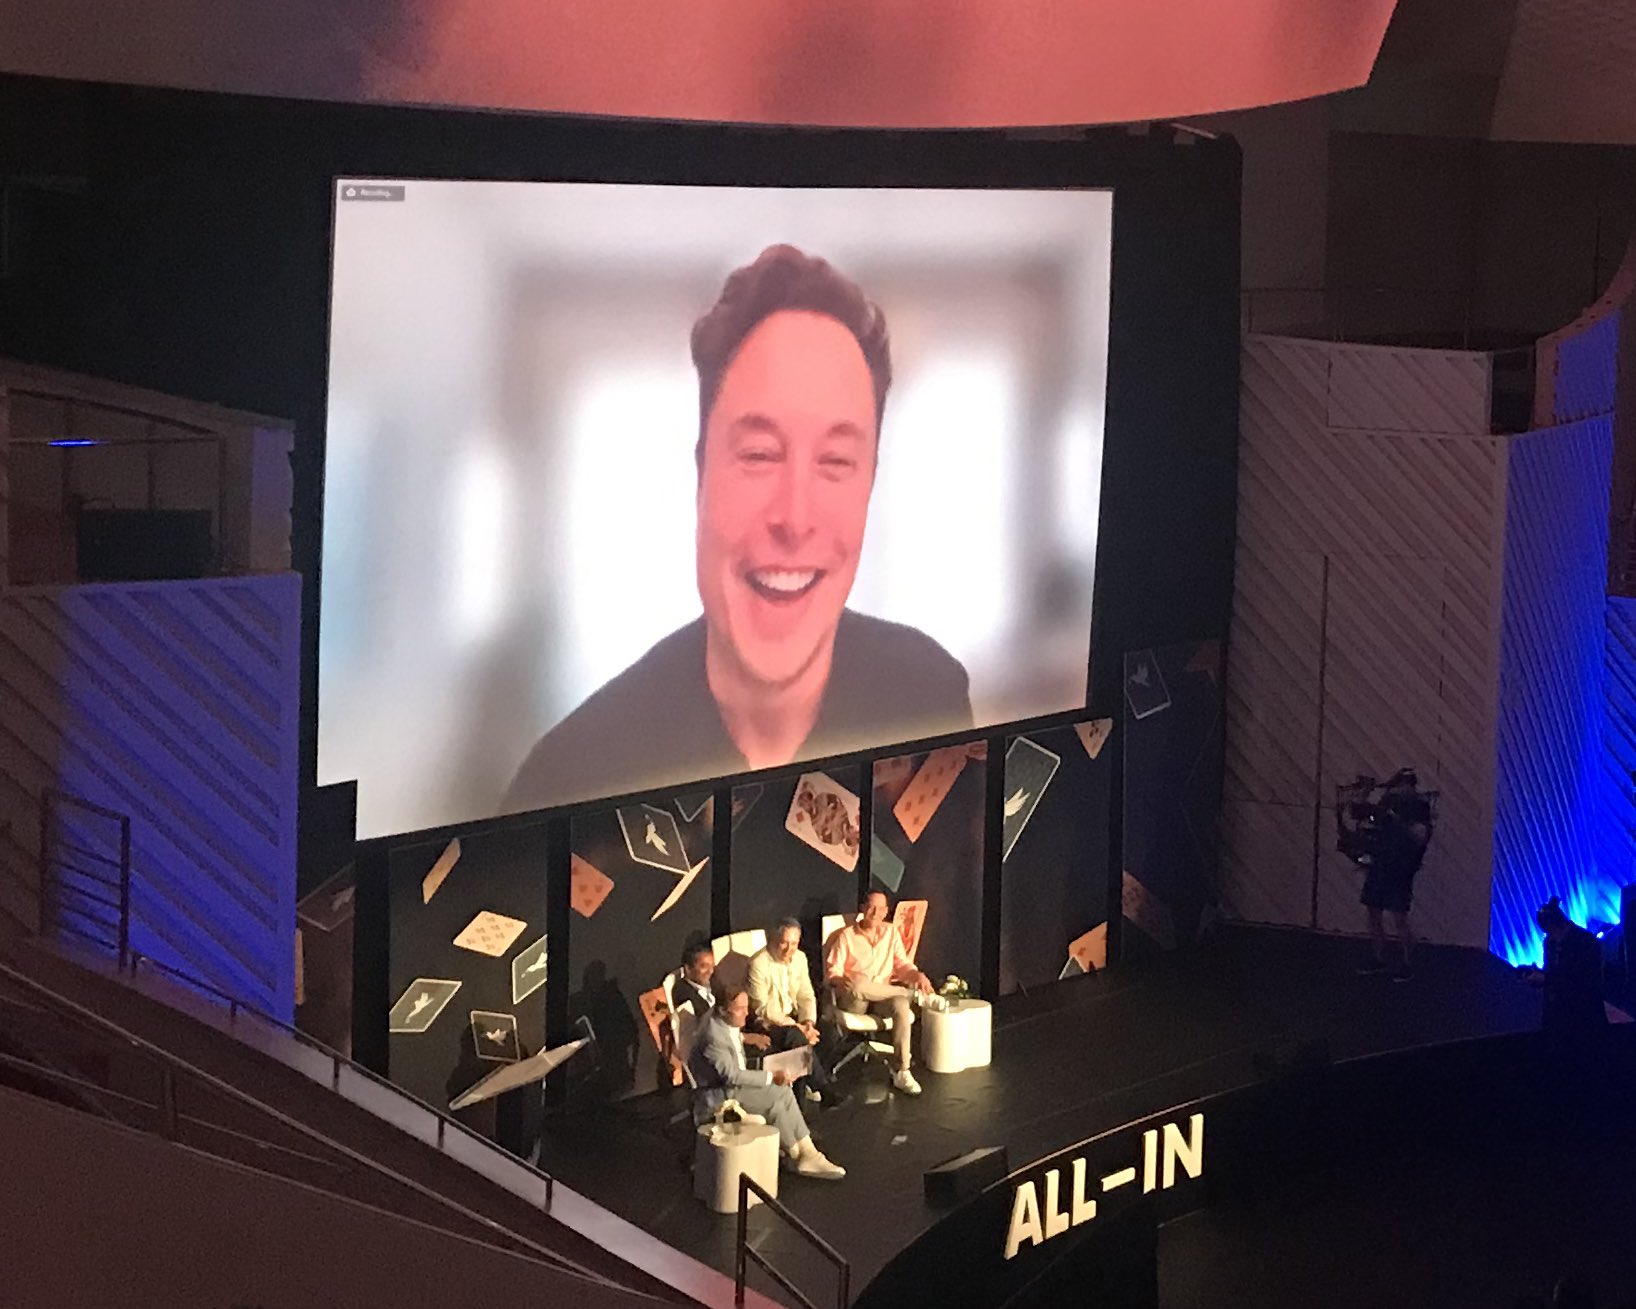 Elon Musk provides insight into number of customers who have purchased FSD, predicting ~1 million FSD Beta testers by the end of year [Video]